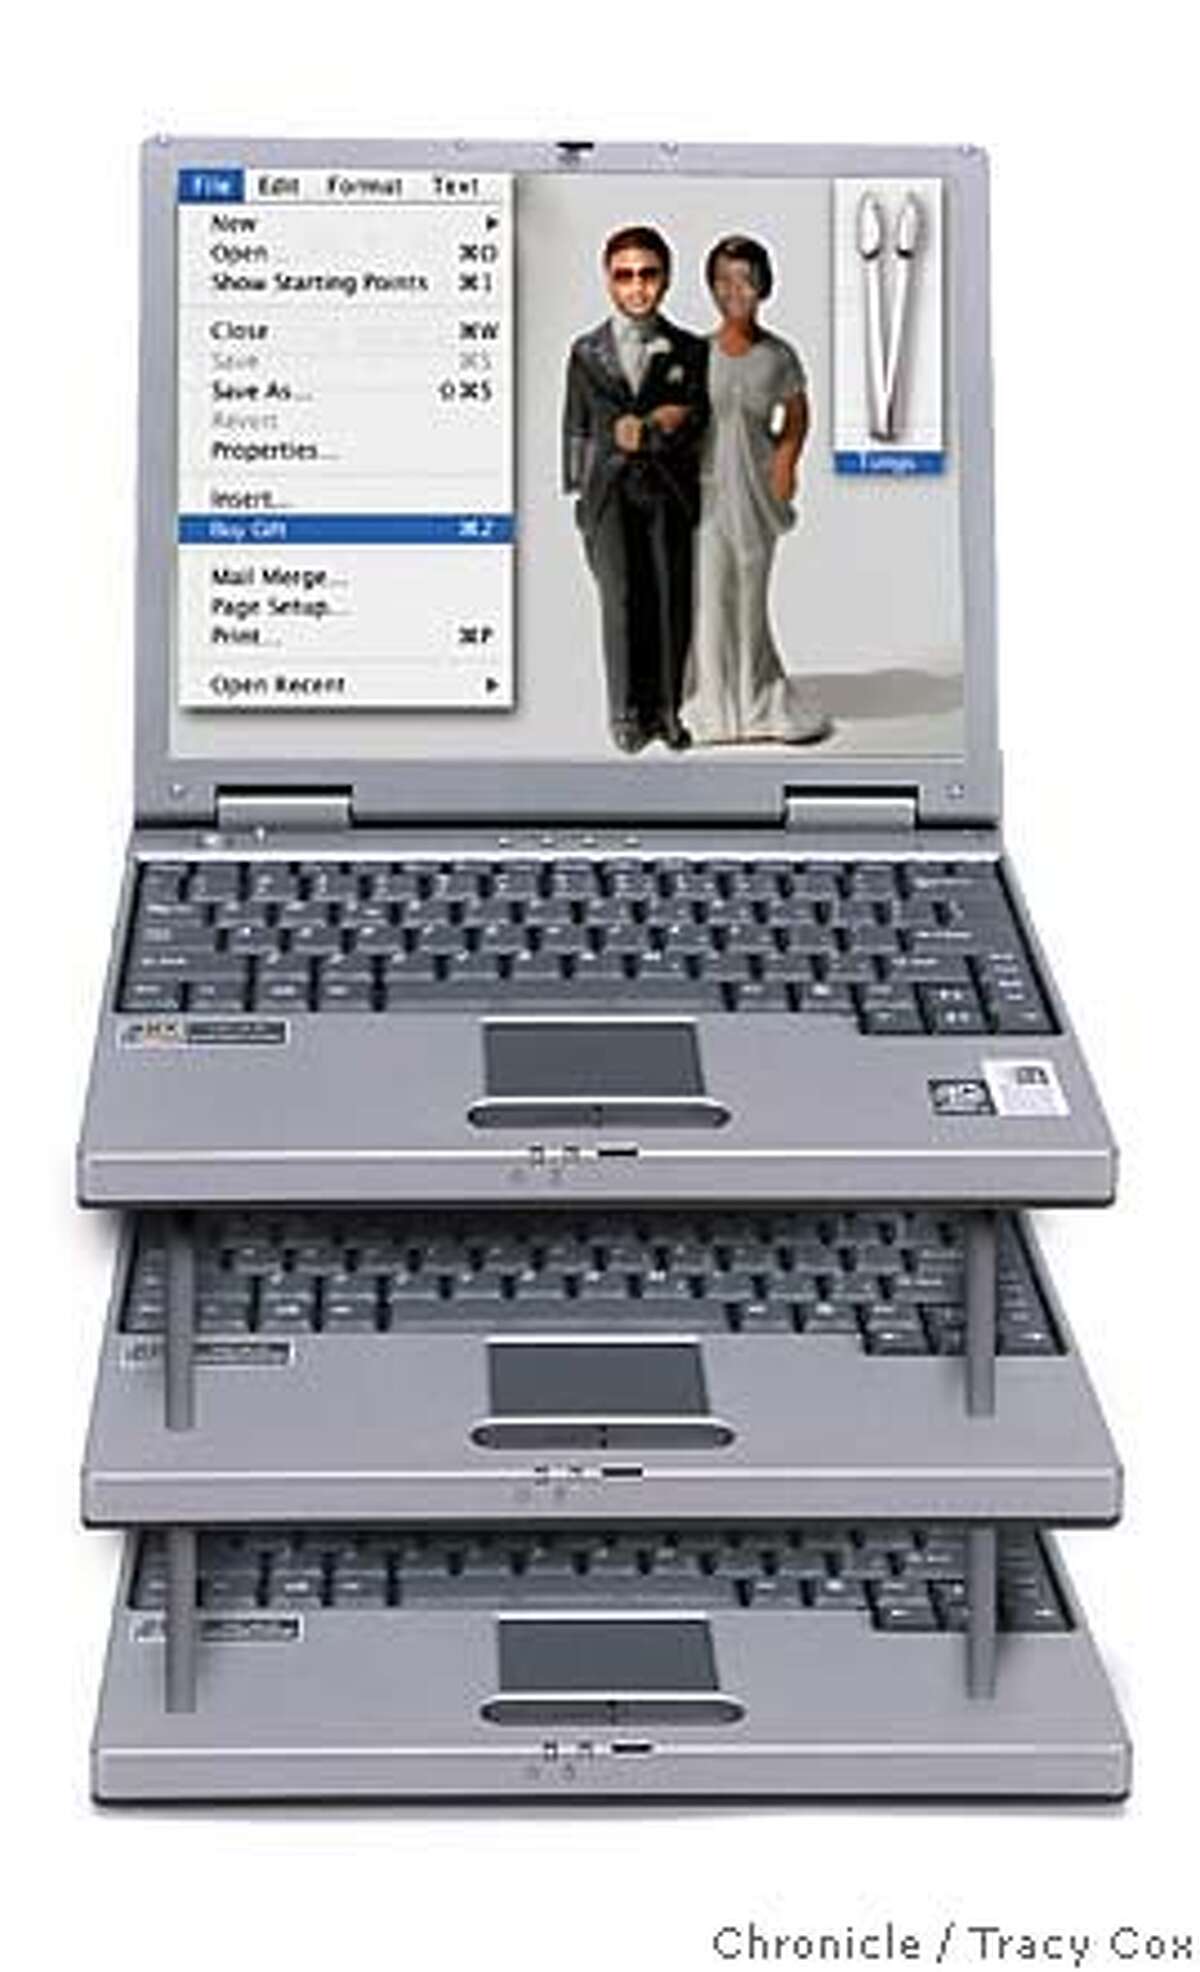 Dell Inspirion 2000 laptop For Peter Hartlaub story on technology ruing weddings. Sent Usher and his bride an asparagas clamp for gift from Crate and Barrel